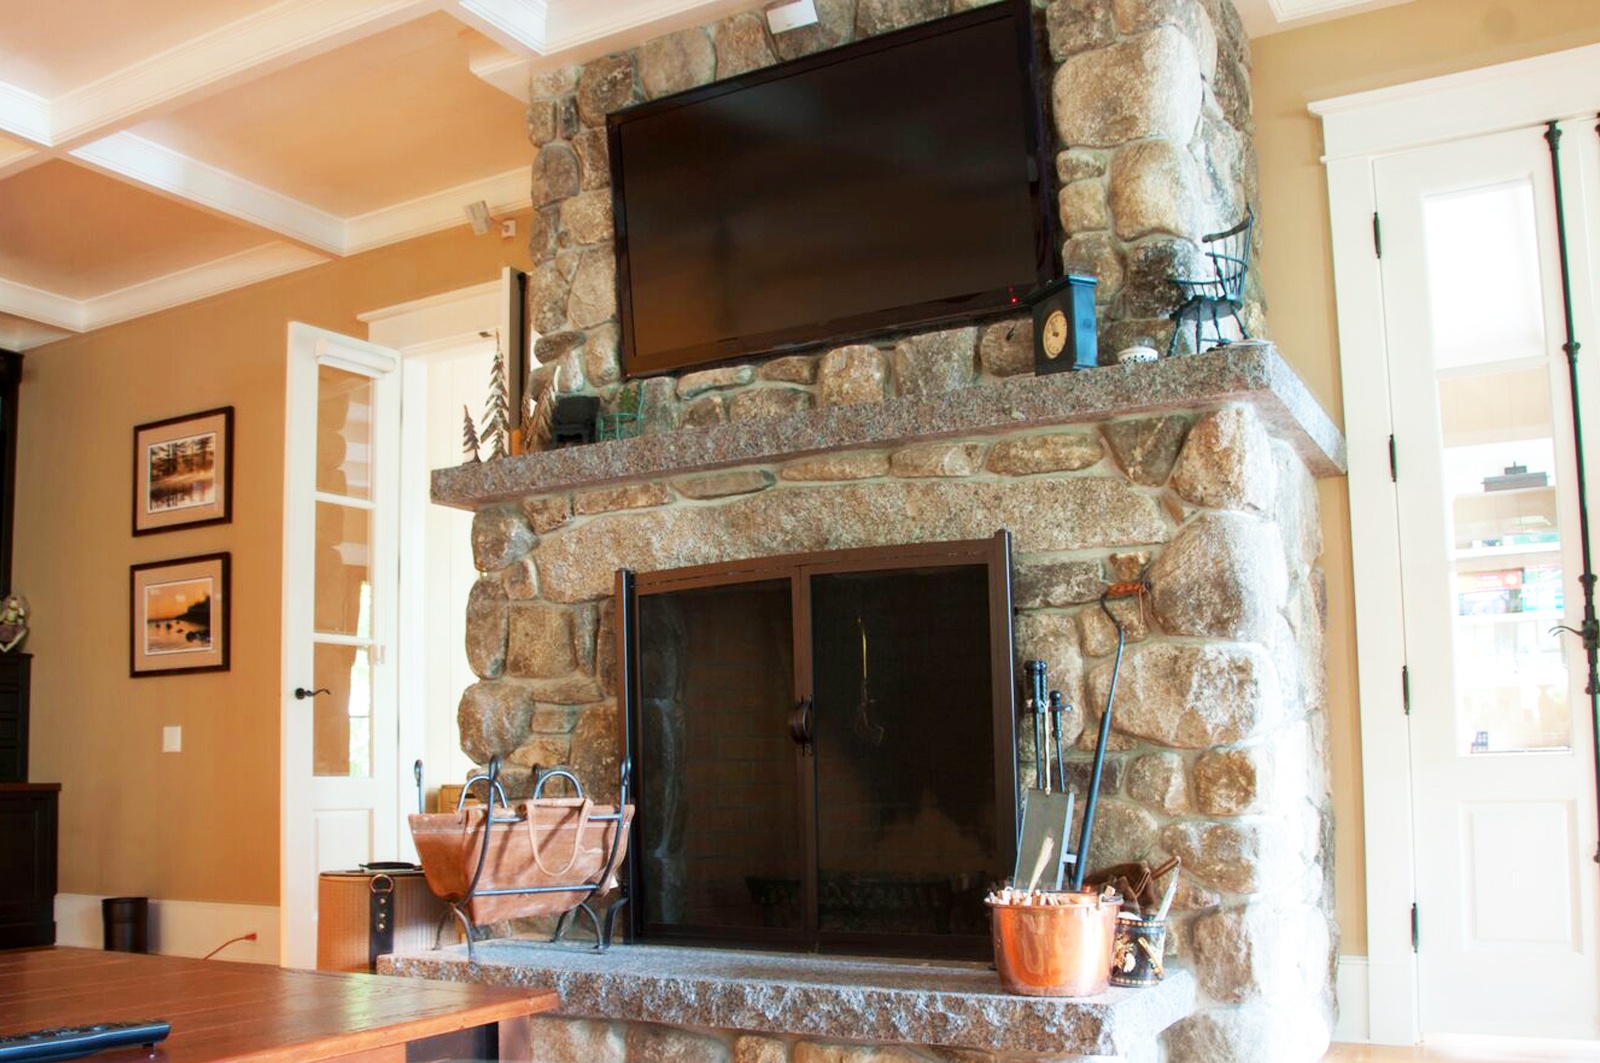 Natural stone fireplace Caledonia granite hearth and mantel